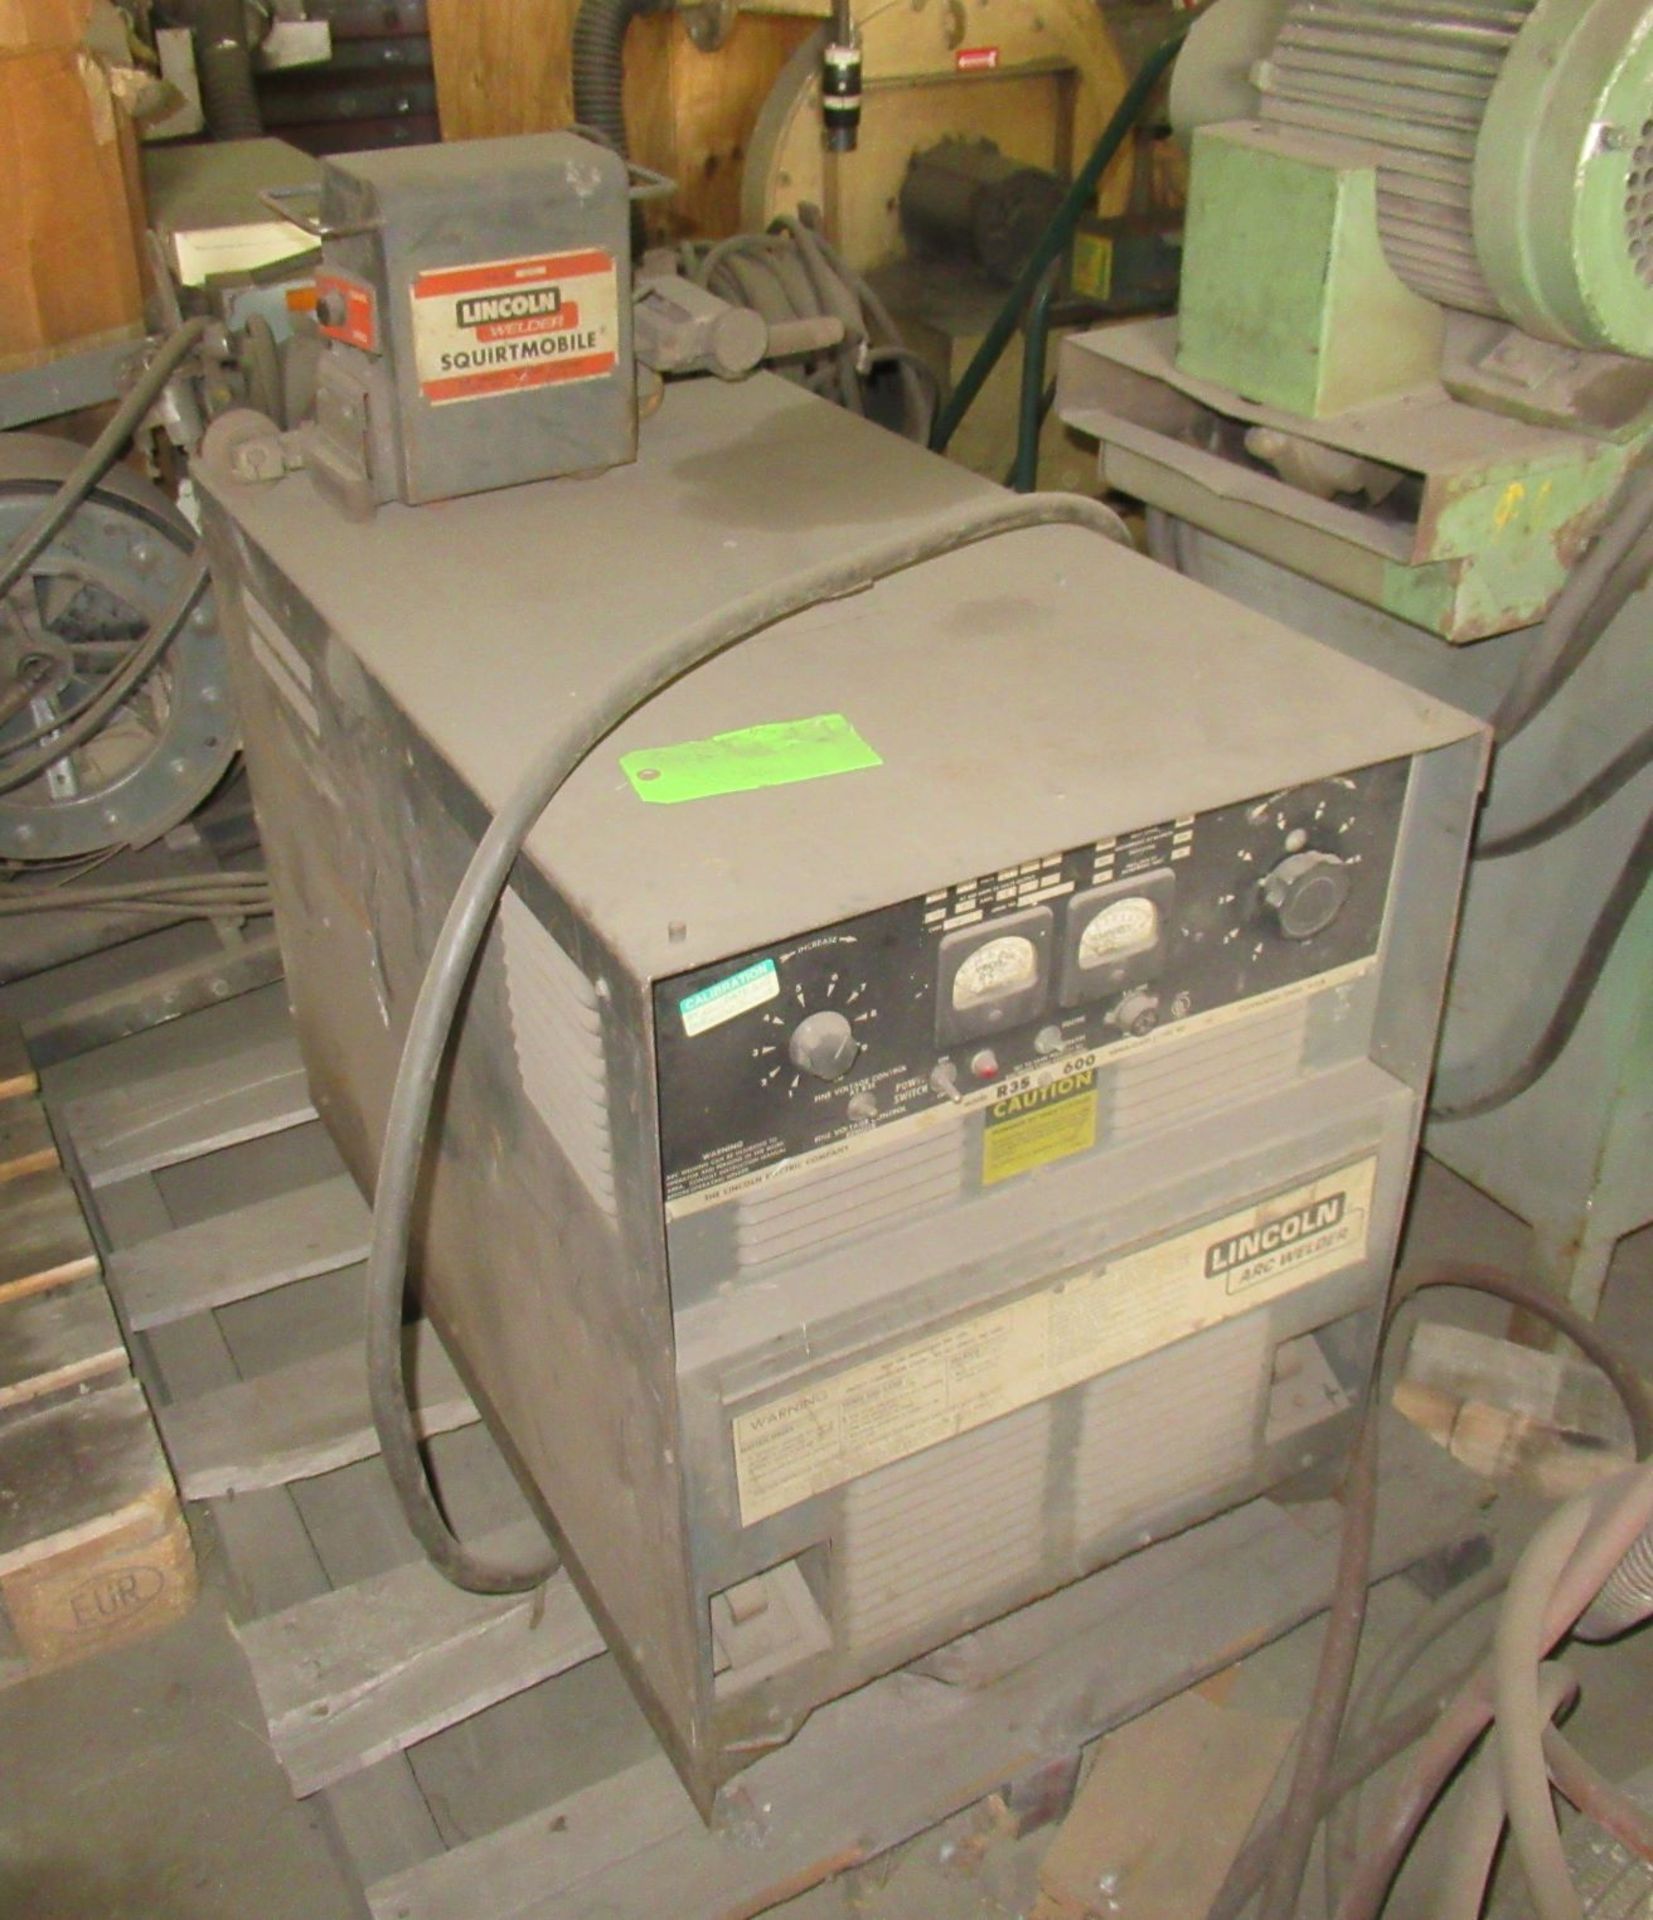 Lincoln R3S-600 Welding Power Supply with Lincoln Squirt Mobile